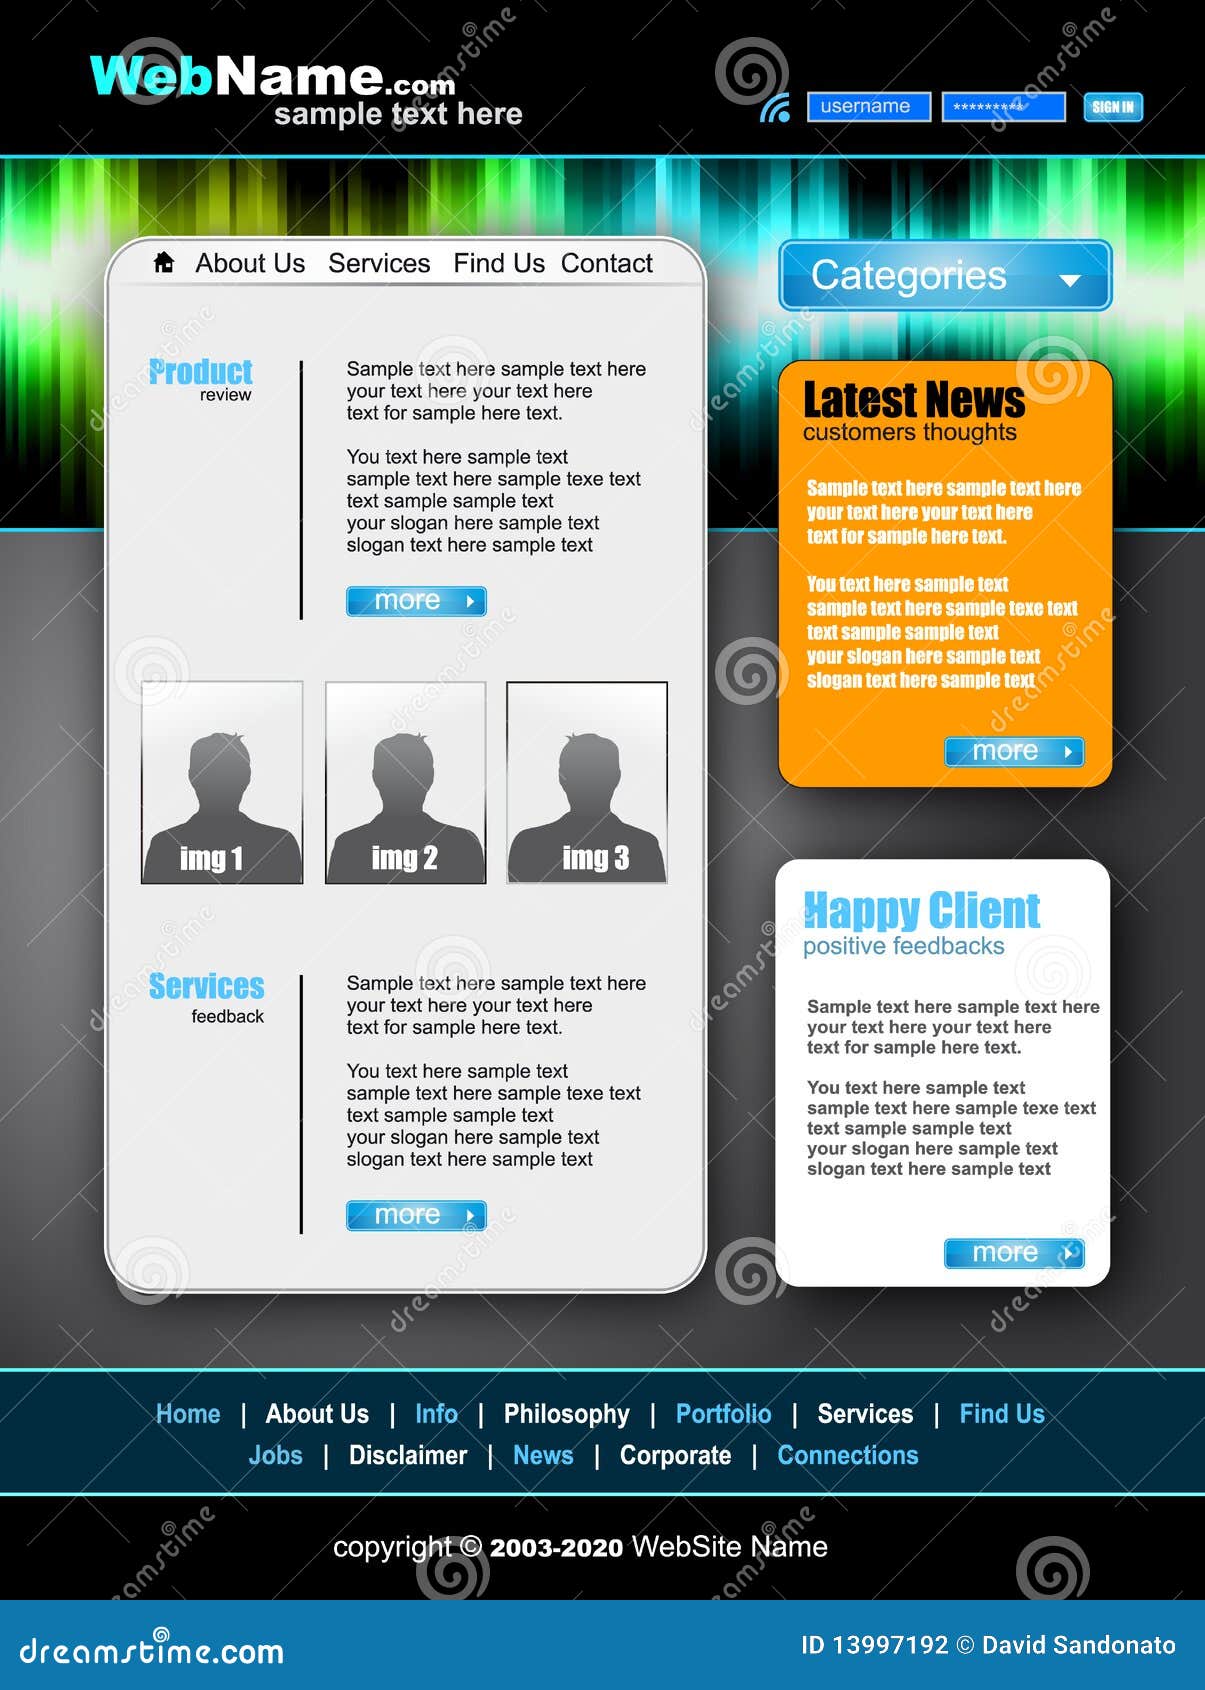 morder and futuristic style website template